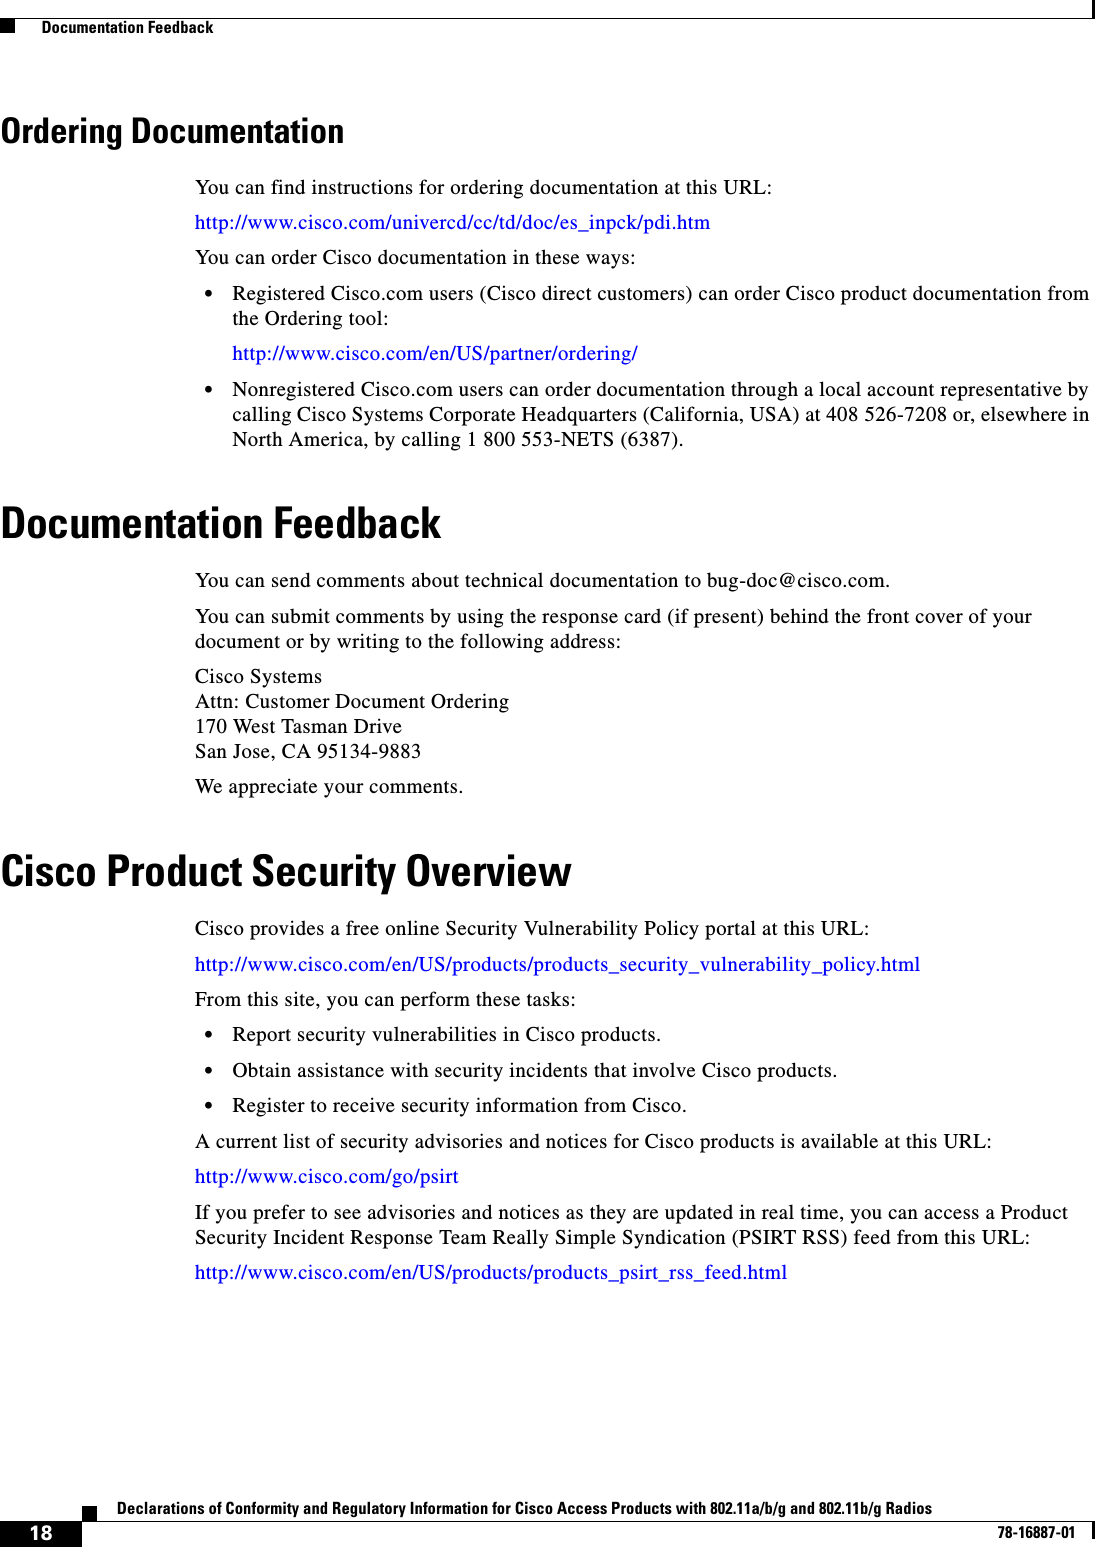  18Declarations of Conformity and Regulatory Information for Cisco Access Products with 802.11a/b/g and 802.11b/g Radios78-16887-01  Documentation FeedbackOrdering DocumentationYou can find instructions for ordering documentation at this URL:http://www.cisco.com/univercd/cc/td/doc/es_inpck/pdi.htmYou can order Cisco documentation in these ways:•Registered Cisco.com users (Cisco direct customers) can order Cisco product documentation from the Ordering tool:http://www.cisco.com/en/US/partner/ordering/•Nonregistered Cisco.com users can order documentation through a local account representative by calling Cisco Systems Corporate Headquarters (California, USA) at 408 526-7208 or, elsewhere in North America, by calling 1 800 553-NETS (6387).Documentation FeedbackYou can send comments about technical documentation to bug-doc@cisco.com.You can submit comments by using the response card (if present) behind the front cover of your document or by writing to the following address:Cisco SystemsAttn: Customer Document Ordering170 West Tasman DriveSan Jose, CA 95134-9883We appreciate your comments.Cisco Product Security OverviewCisco provides a free online Security Vulnerability Policy portal at this URL:http://www.cisco.com/en/US/products/products_security_vulnerability_policy.htmlFrom this site, you can perform these tasks:•Report security vulnerabilities in Cisco products.•Obtain assistance with security incidents that involve Cisco products.•Register to receive security information from Cisco.A current list of security advisories and notices for Cisco products is available at this URL:http://www.cisco.com/go/psirtIf you prefer to see advisories and notices as they are updated in real time, you can access a Product Security Incident Response Team Really Simple Syndication (PSIRT RSS) feed from this URL:http://www.cisco.com/en/US/products/products_psirt_rss_feed.html